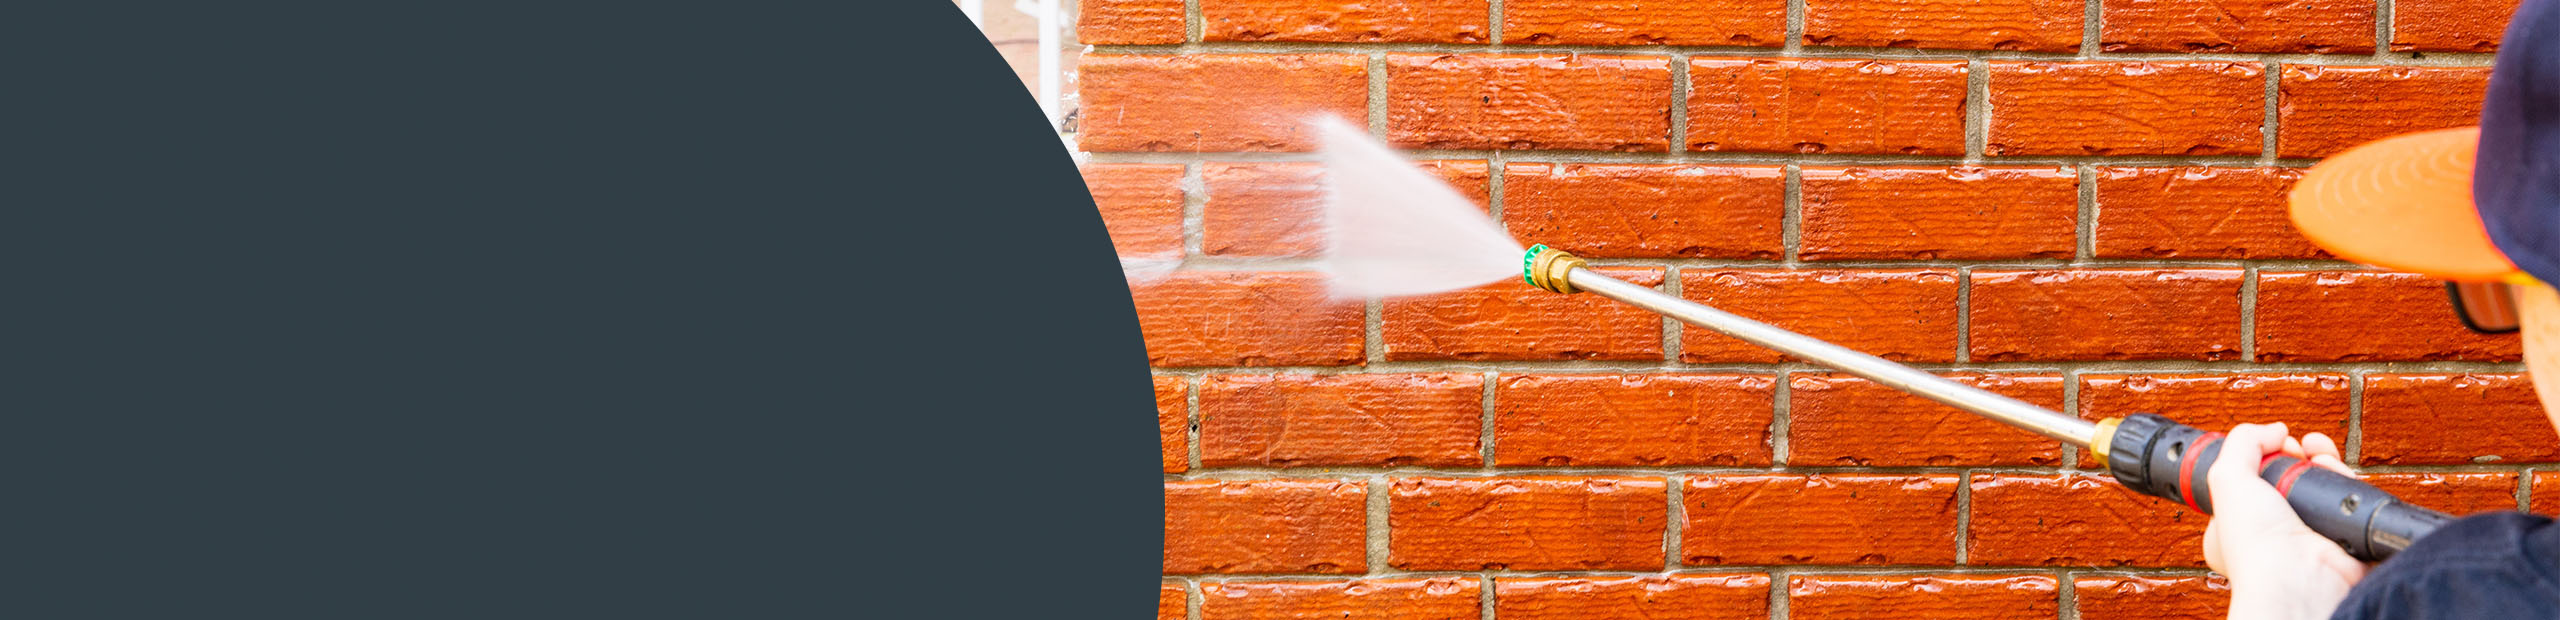 Brick Cleaning Services Broadstairs